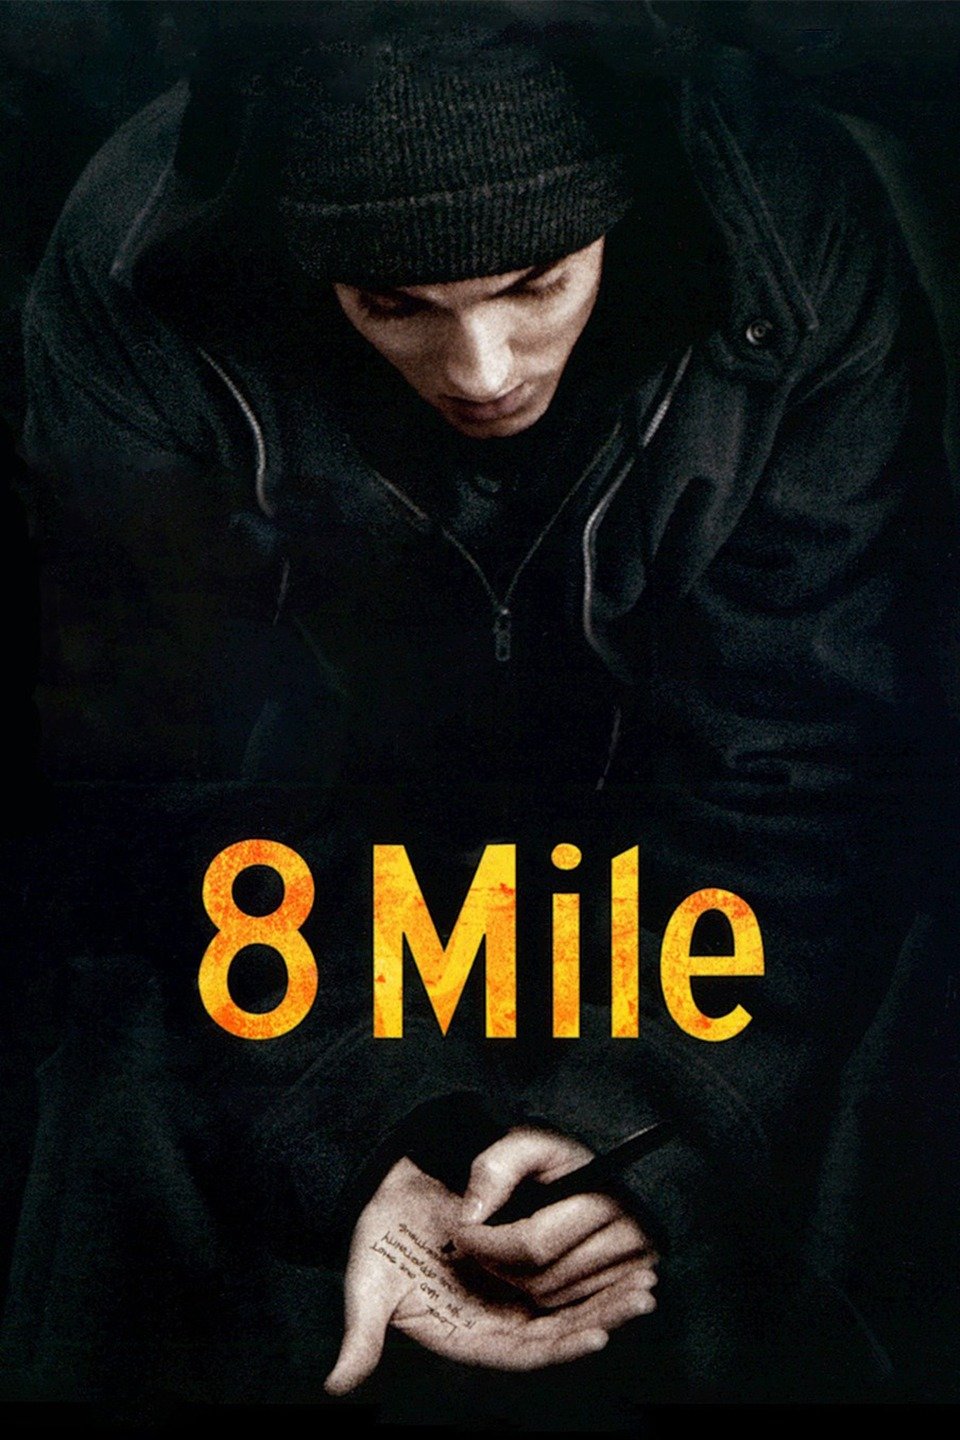 8 mile rappers